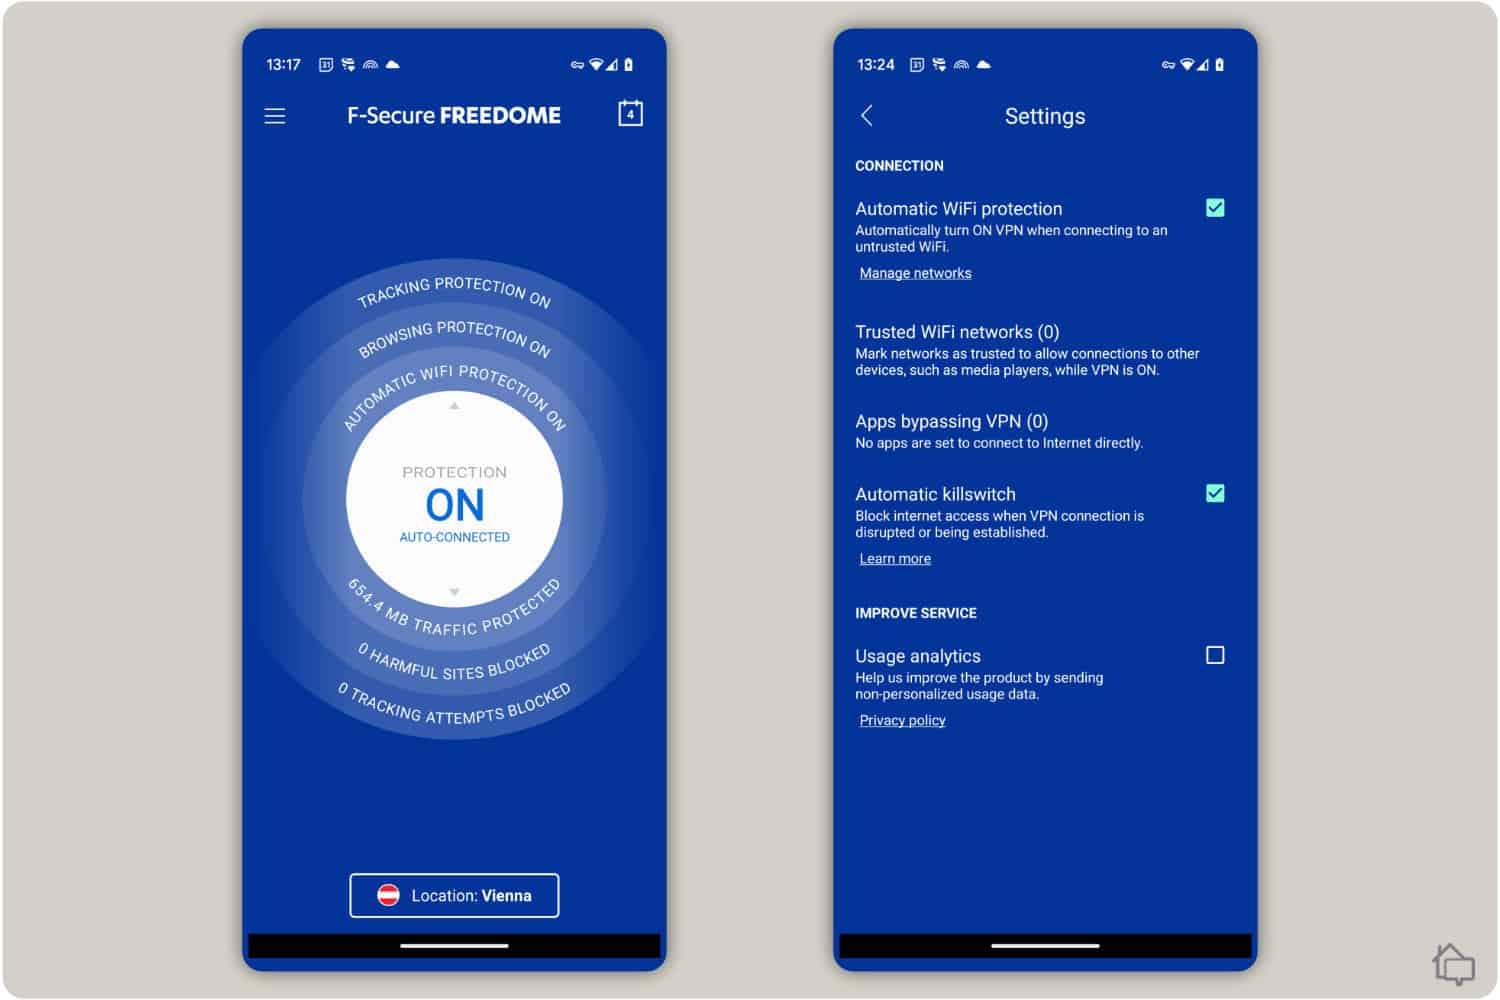 F-Secure’s Android mobile app is nearly identical to the desktop app